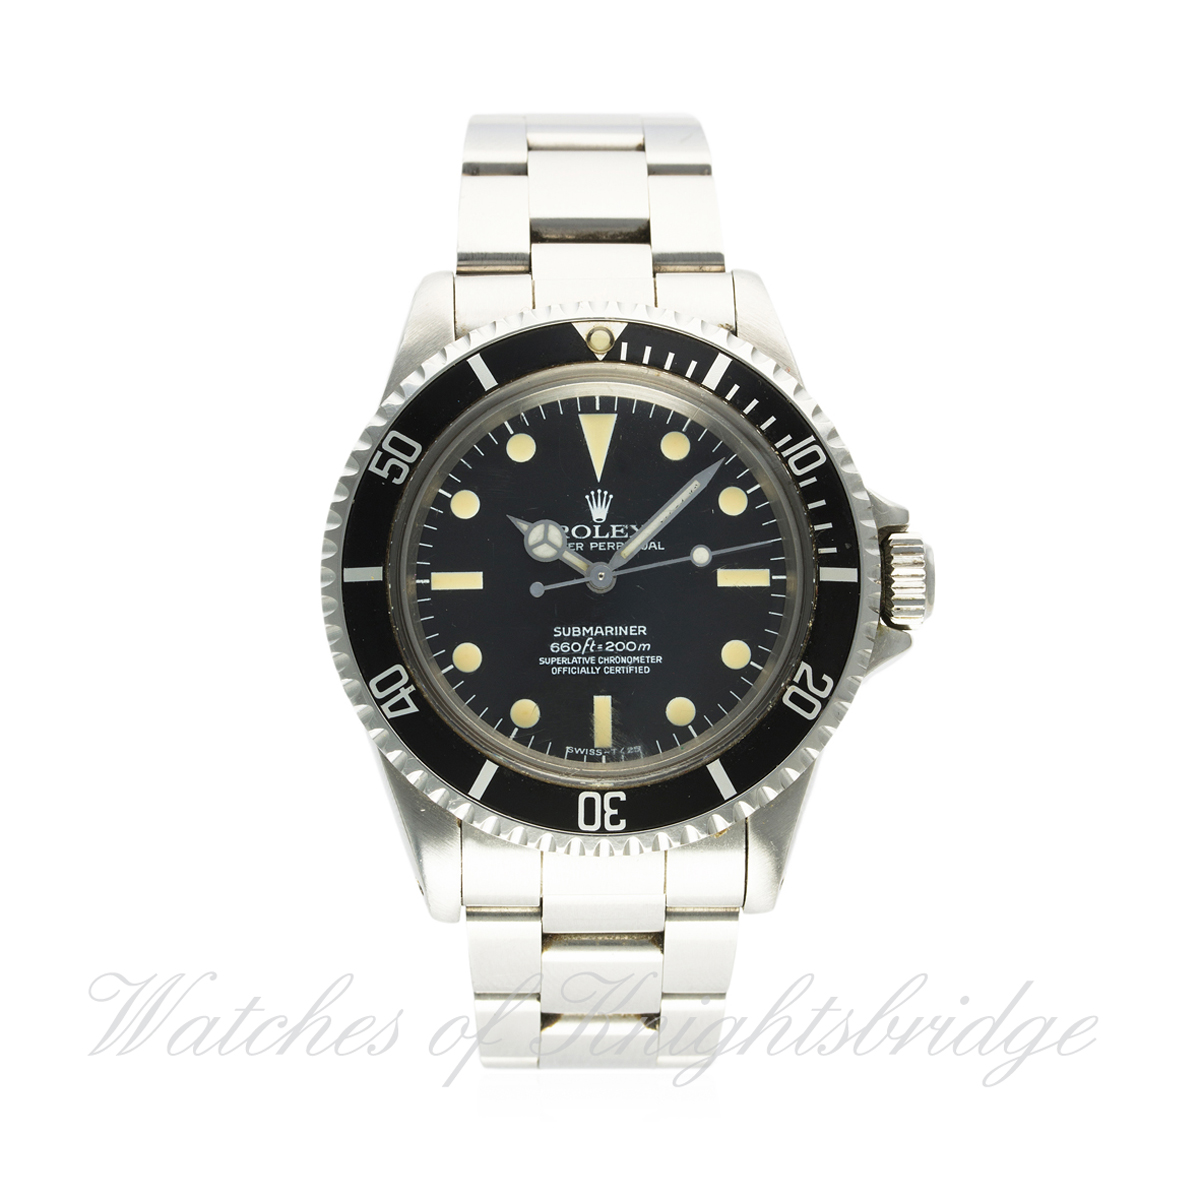 A GENTLEMAN'S STAINLESS STEEL ROLEX OYSTER PERPETUAL SUBMARINER CHRONOMETER BRACELET WATCH CIRCA